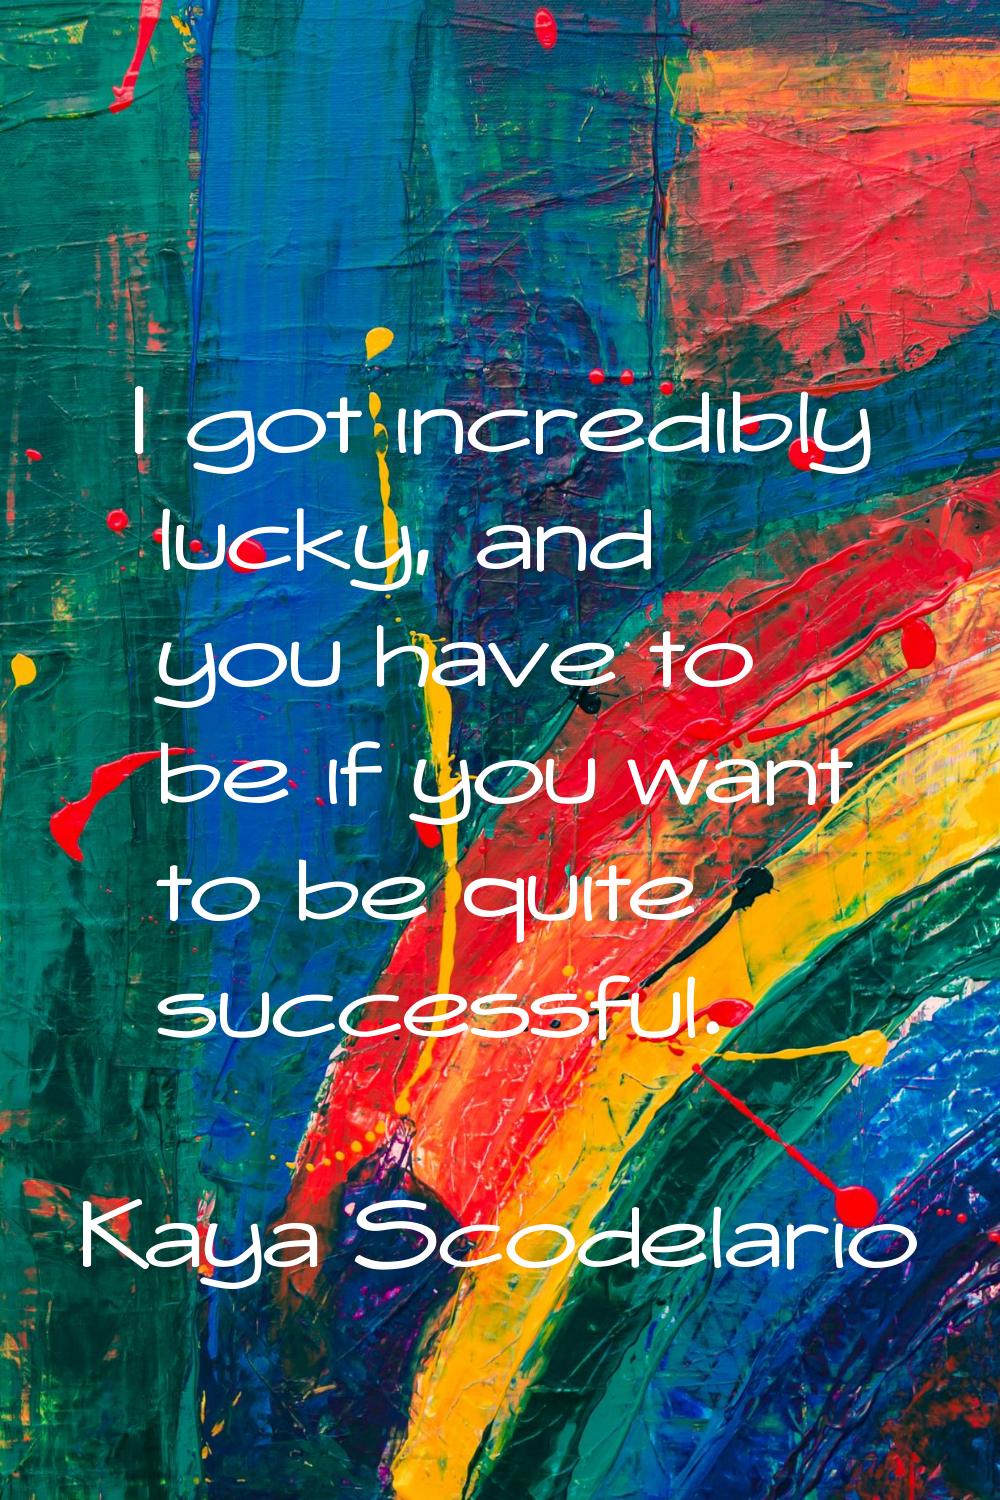 I got incredibly lucky, and you have to be if you want to be quite successful.